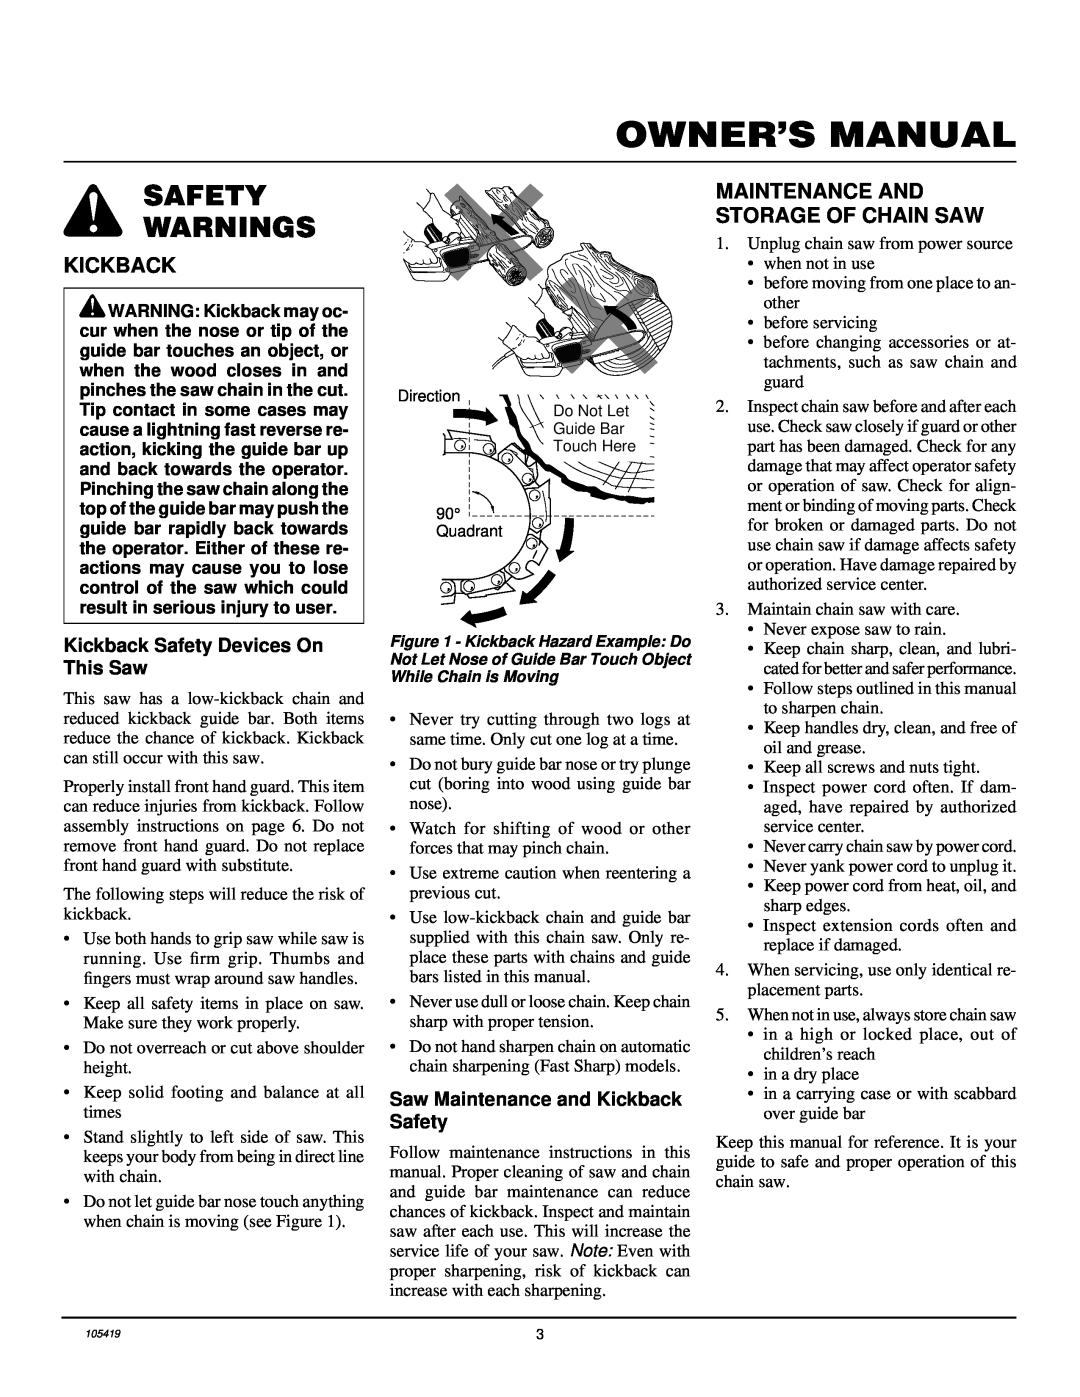 Desa 104316-04, 100089-01 Maintenance And Storage Of Chain Saw, Kickback Safety Devices On This Saw, Safety Warnings 